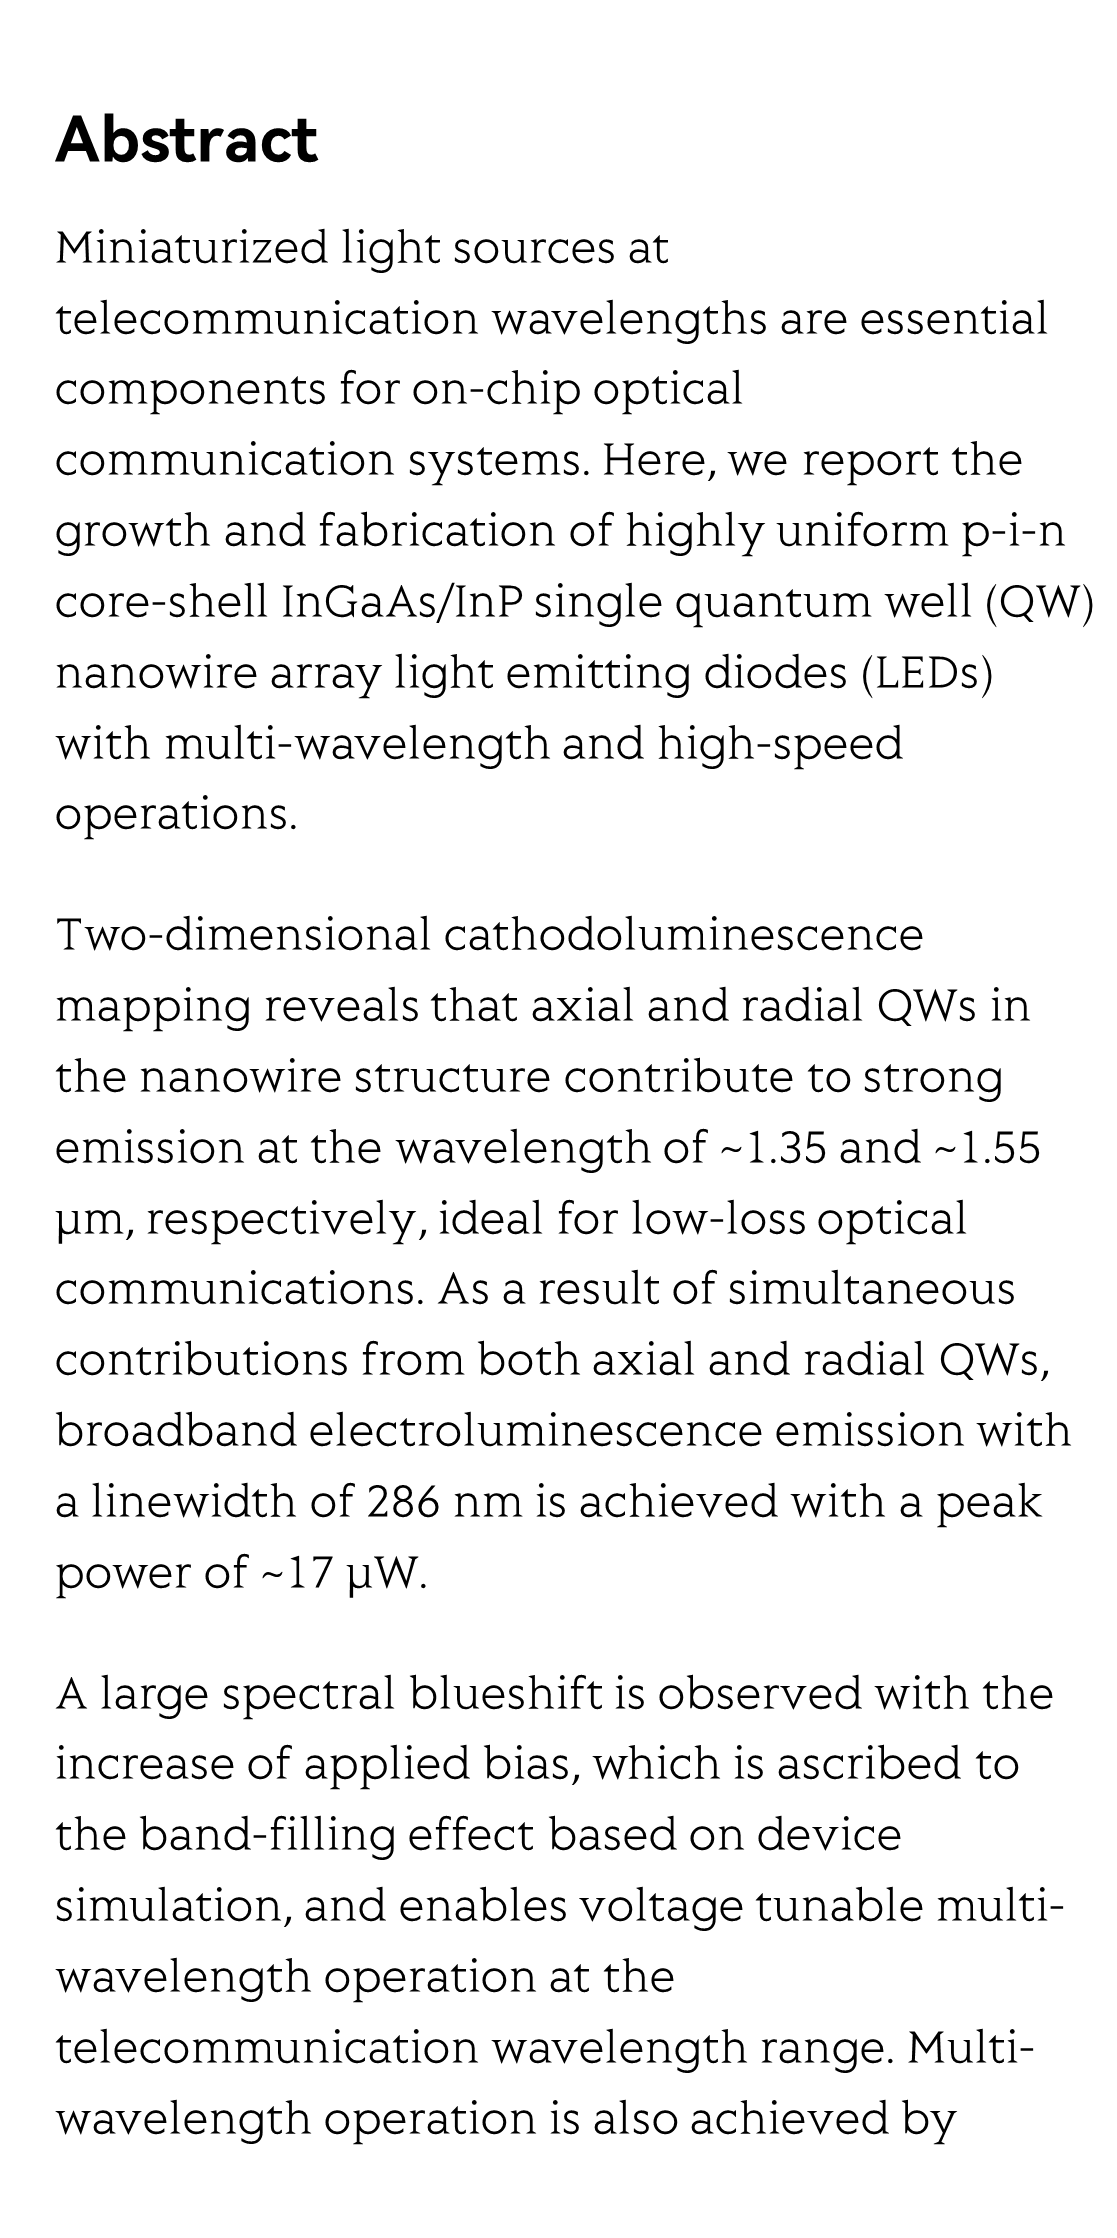 High-speed multiwavelength InGaAs/InP quantum well nanowire array micro-LEDs for next generation optical communications_2